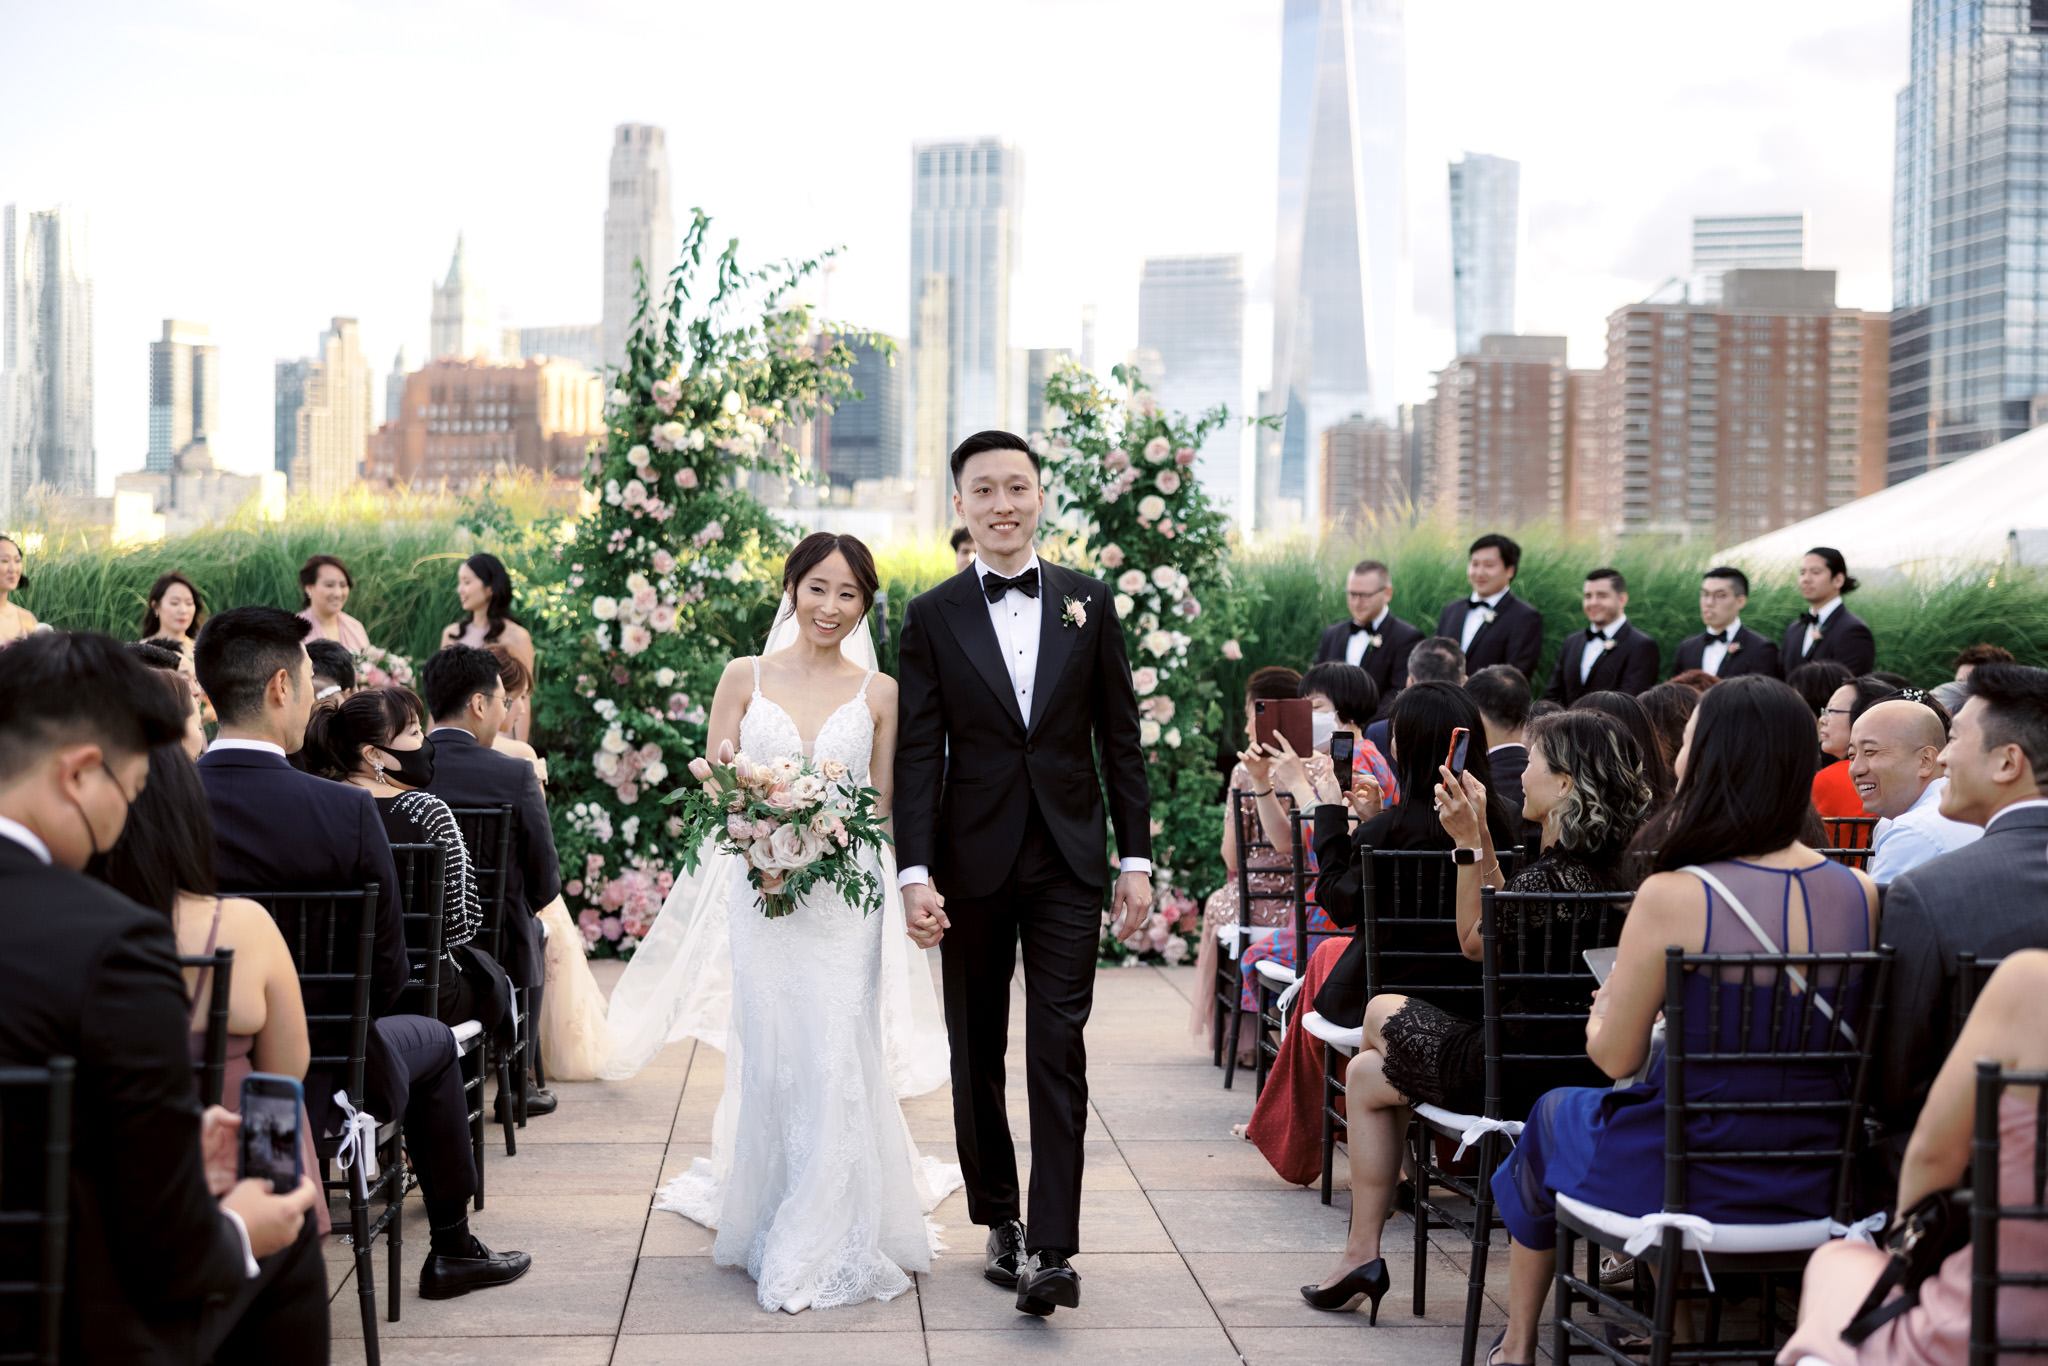 The bride and groom are walking away after the wedding ceremony at a beautiful garden NYC wedding venue. Editorial wedding image by Jenny Fu Studio